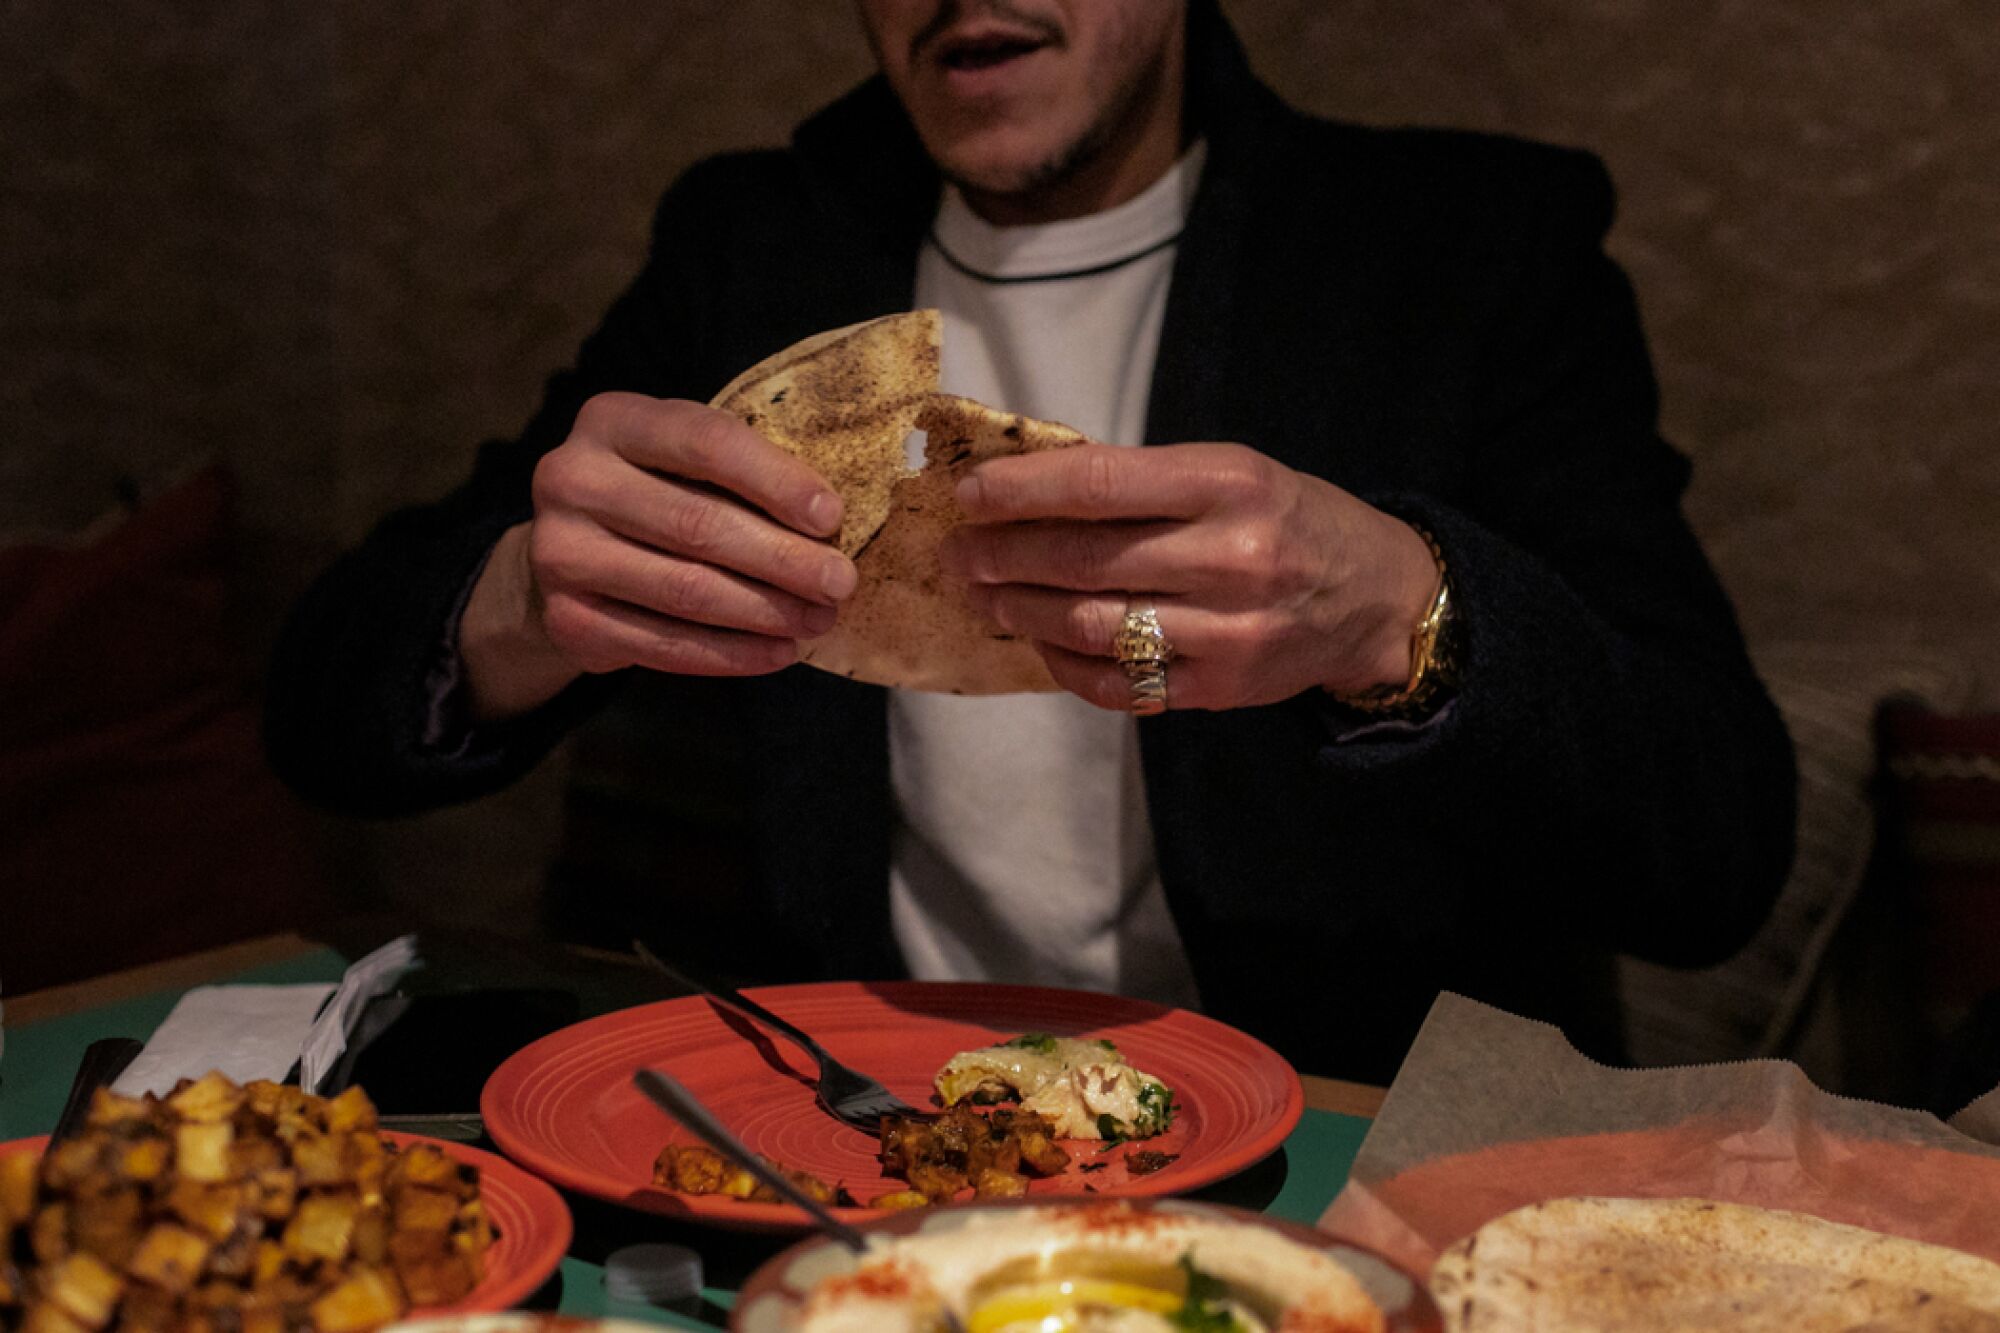 A man tears some pita bread at a Middle Eastern restaurant.